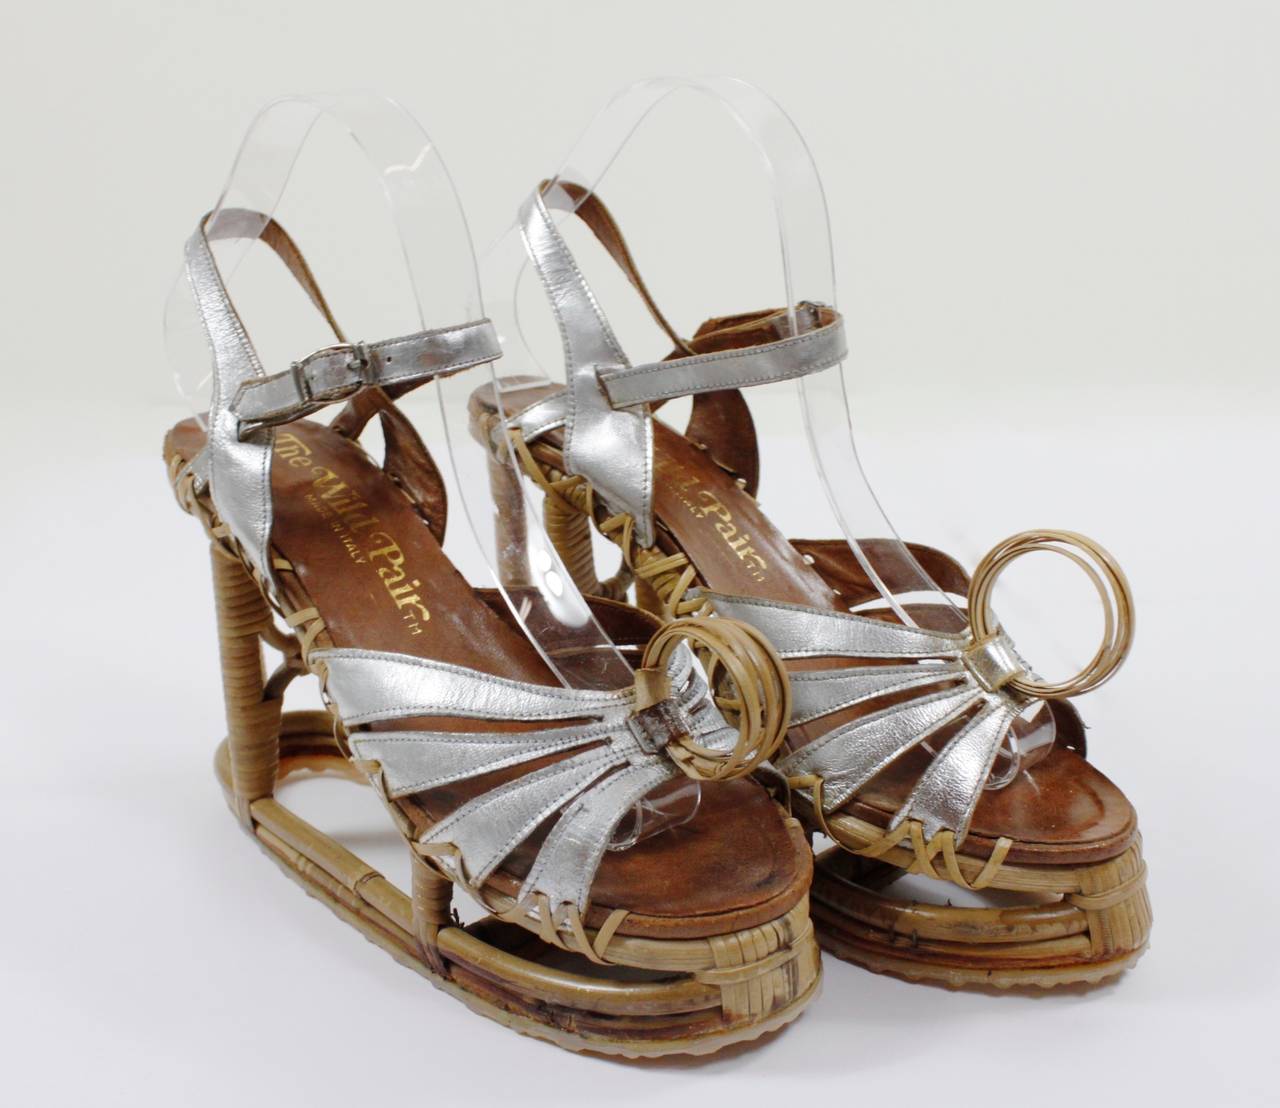 A fabulous pair of reed and leather wedges. The scaffolding-like reed wrapped pillars create a dynamic wedge heel with silver metallic straps.

Heel Height: 5 inches
Shoes Size: 6